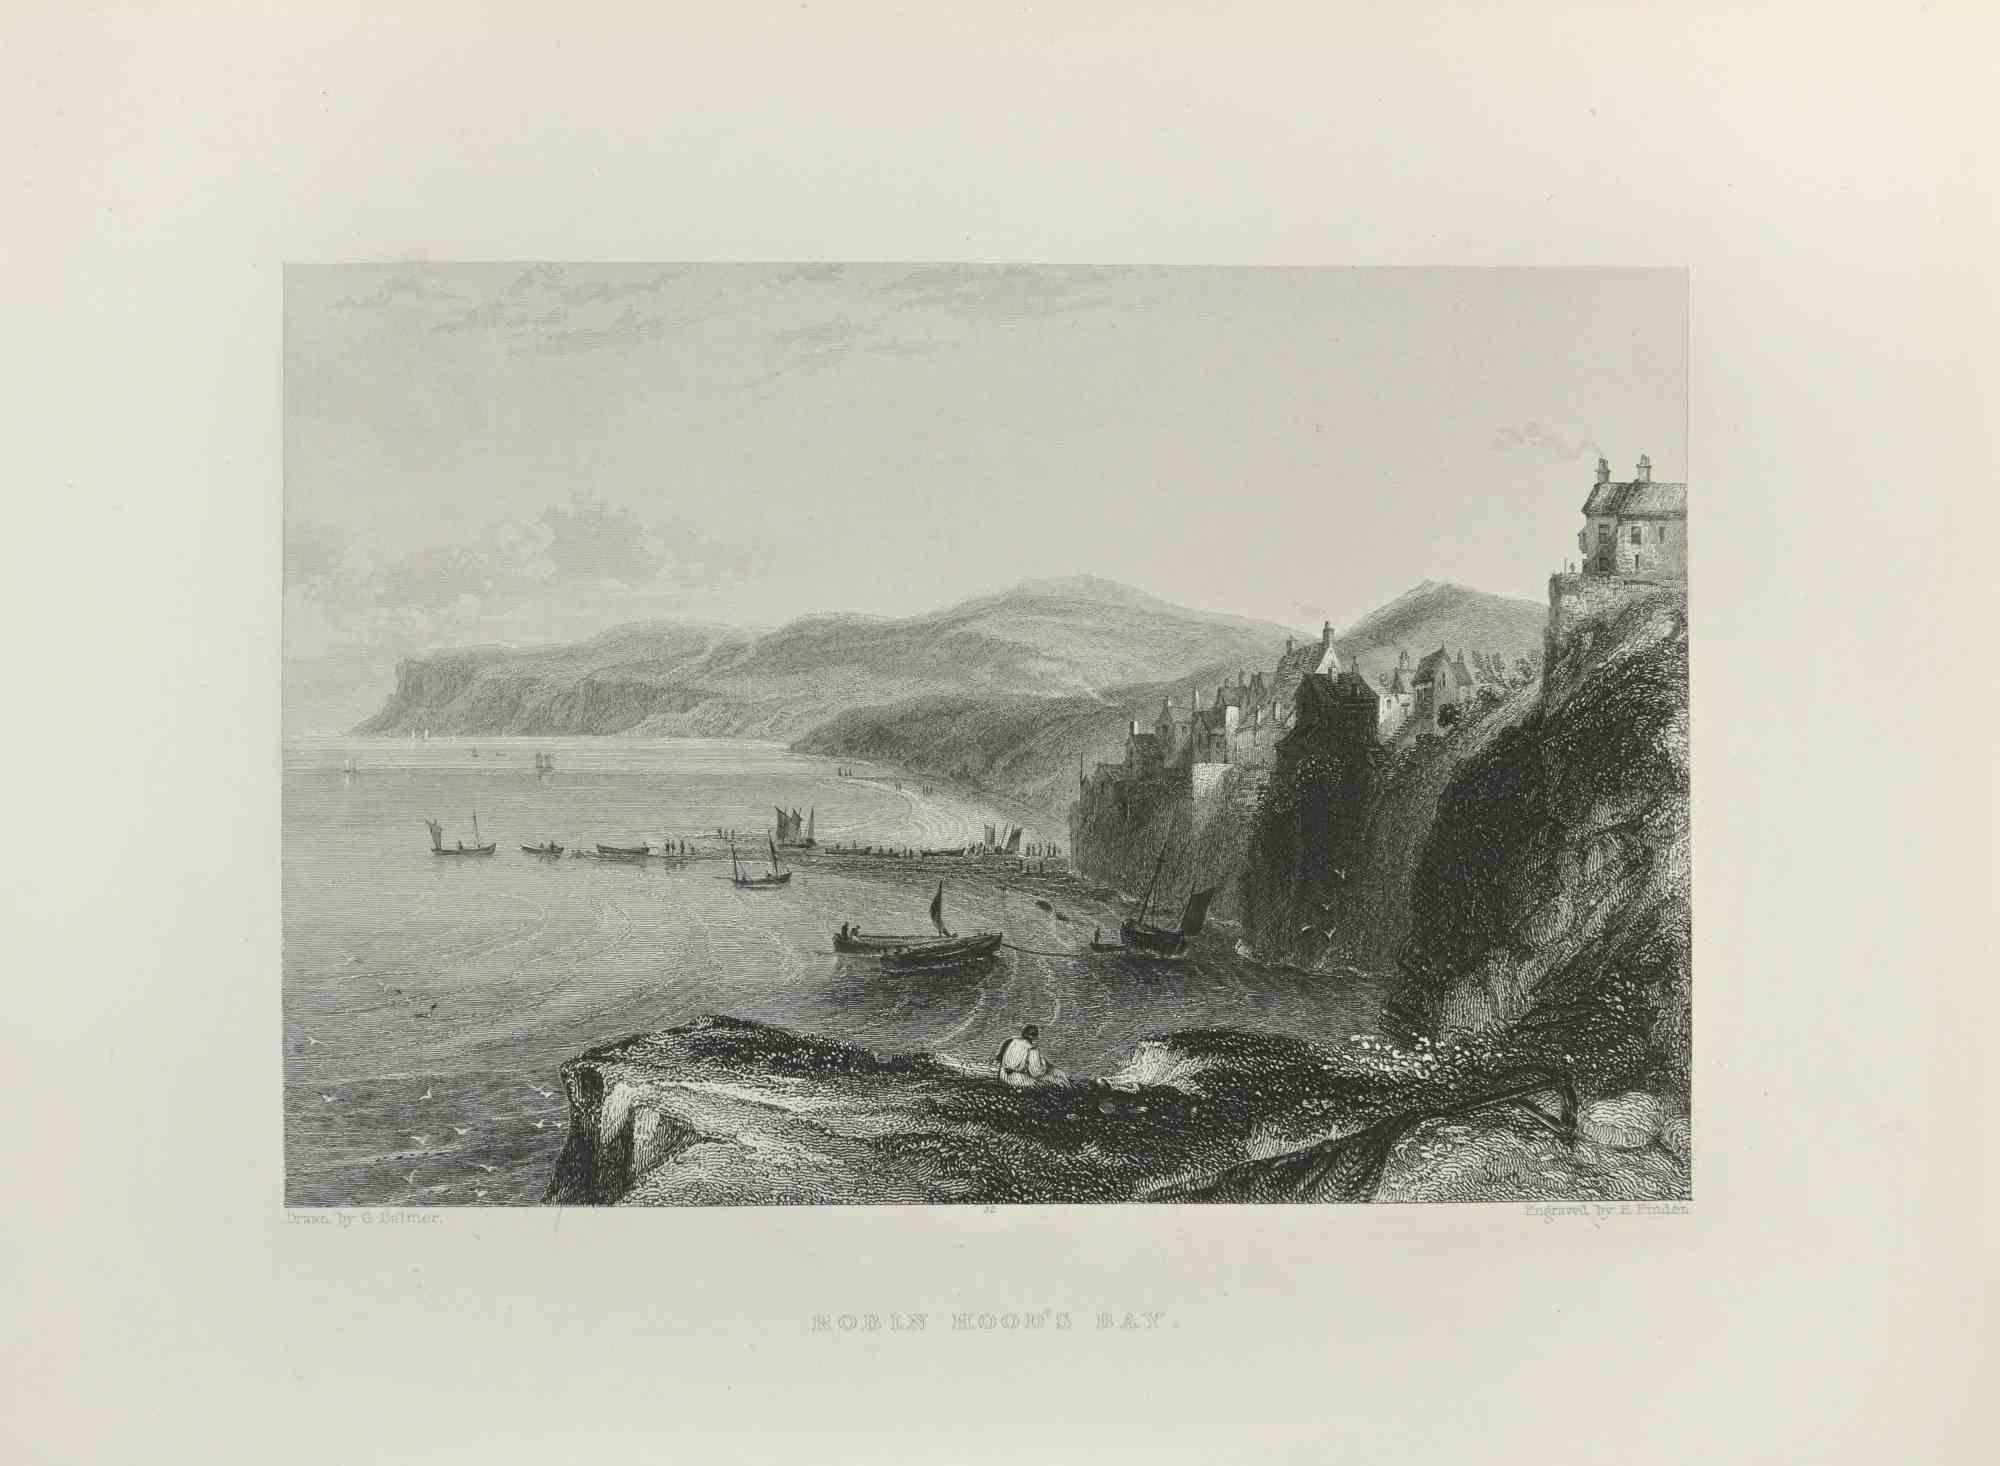 Robin Hood's Bay - Engraving  by Edward Frencis Finden - 1845